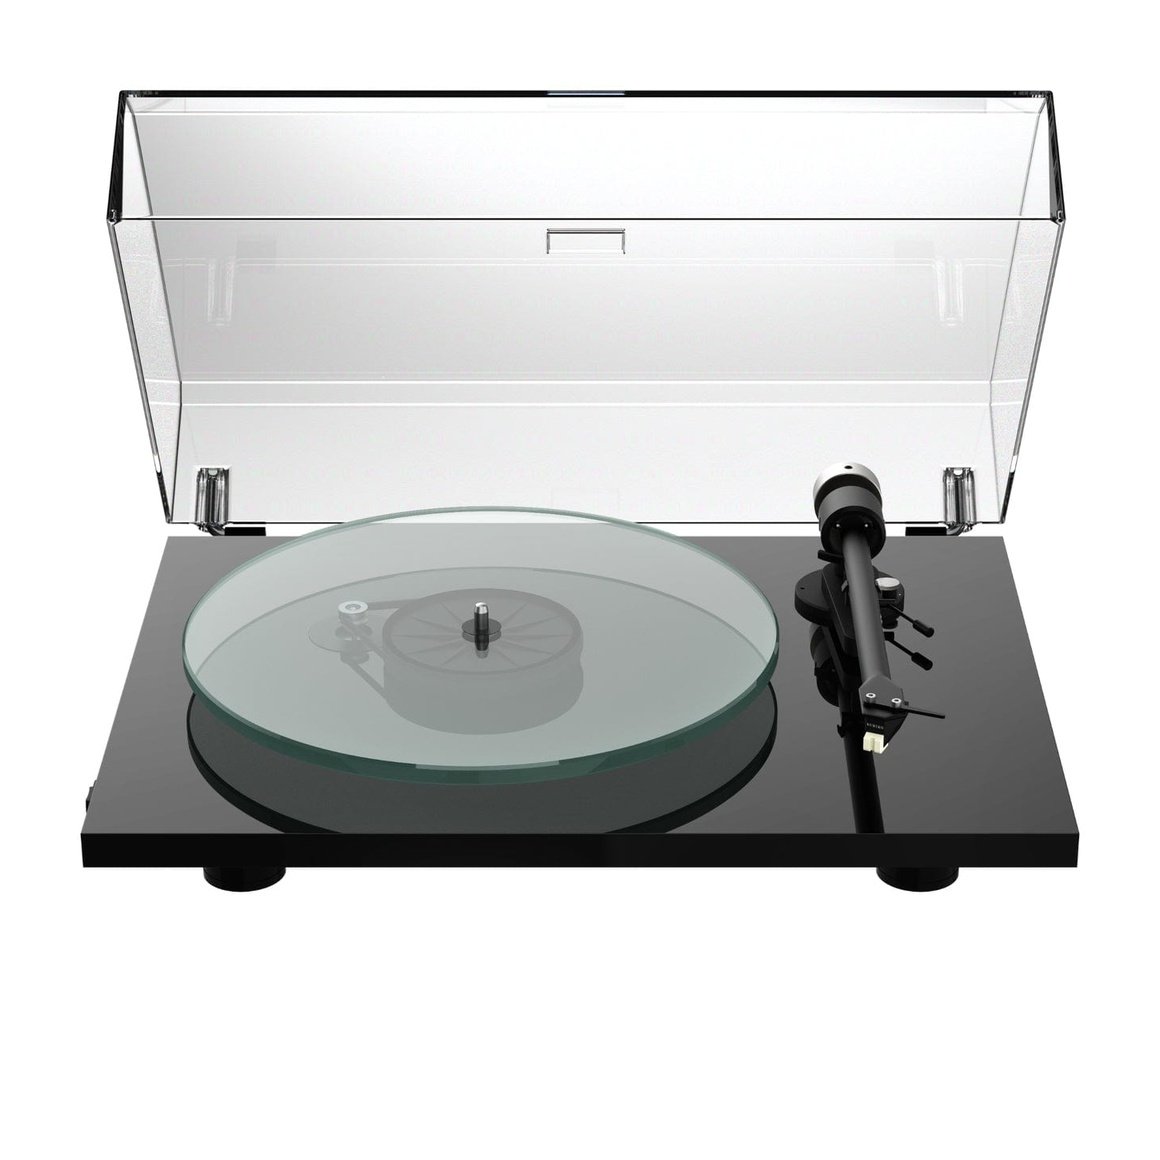 Pro-Ject Pro-Ject T2 W Turntable Stream Vinyl Turntables